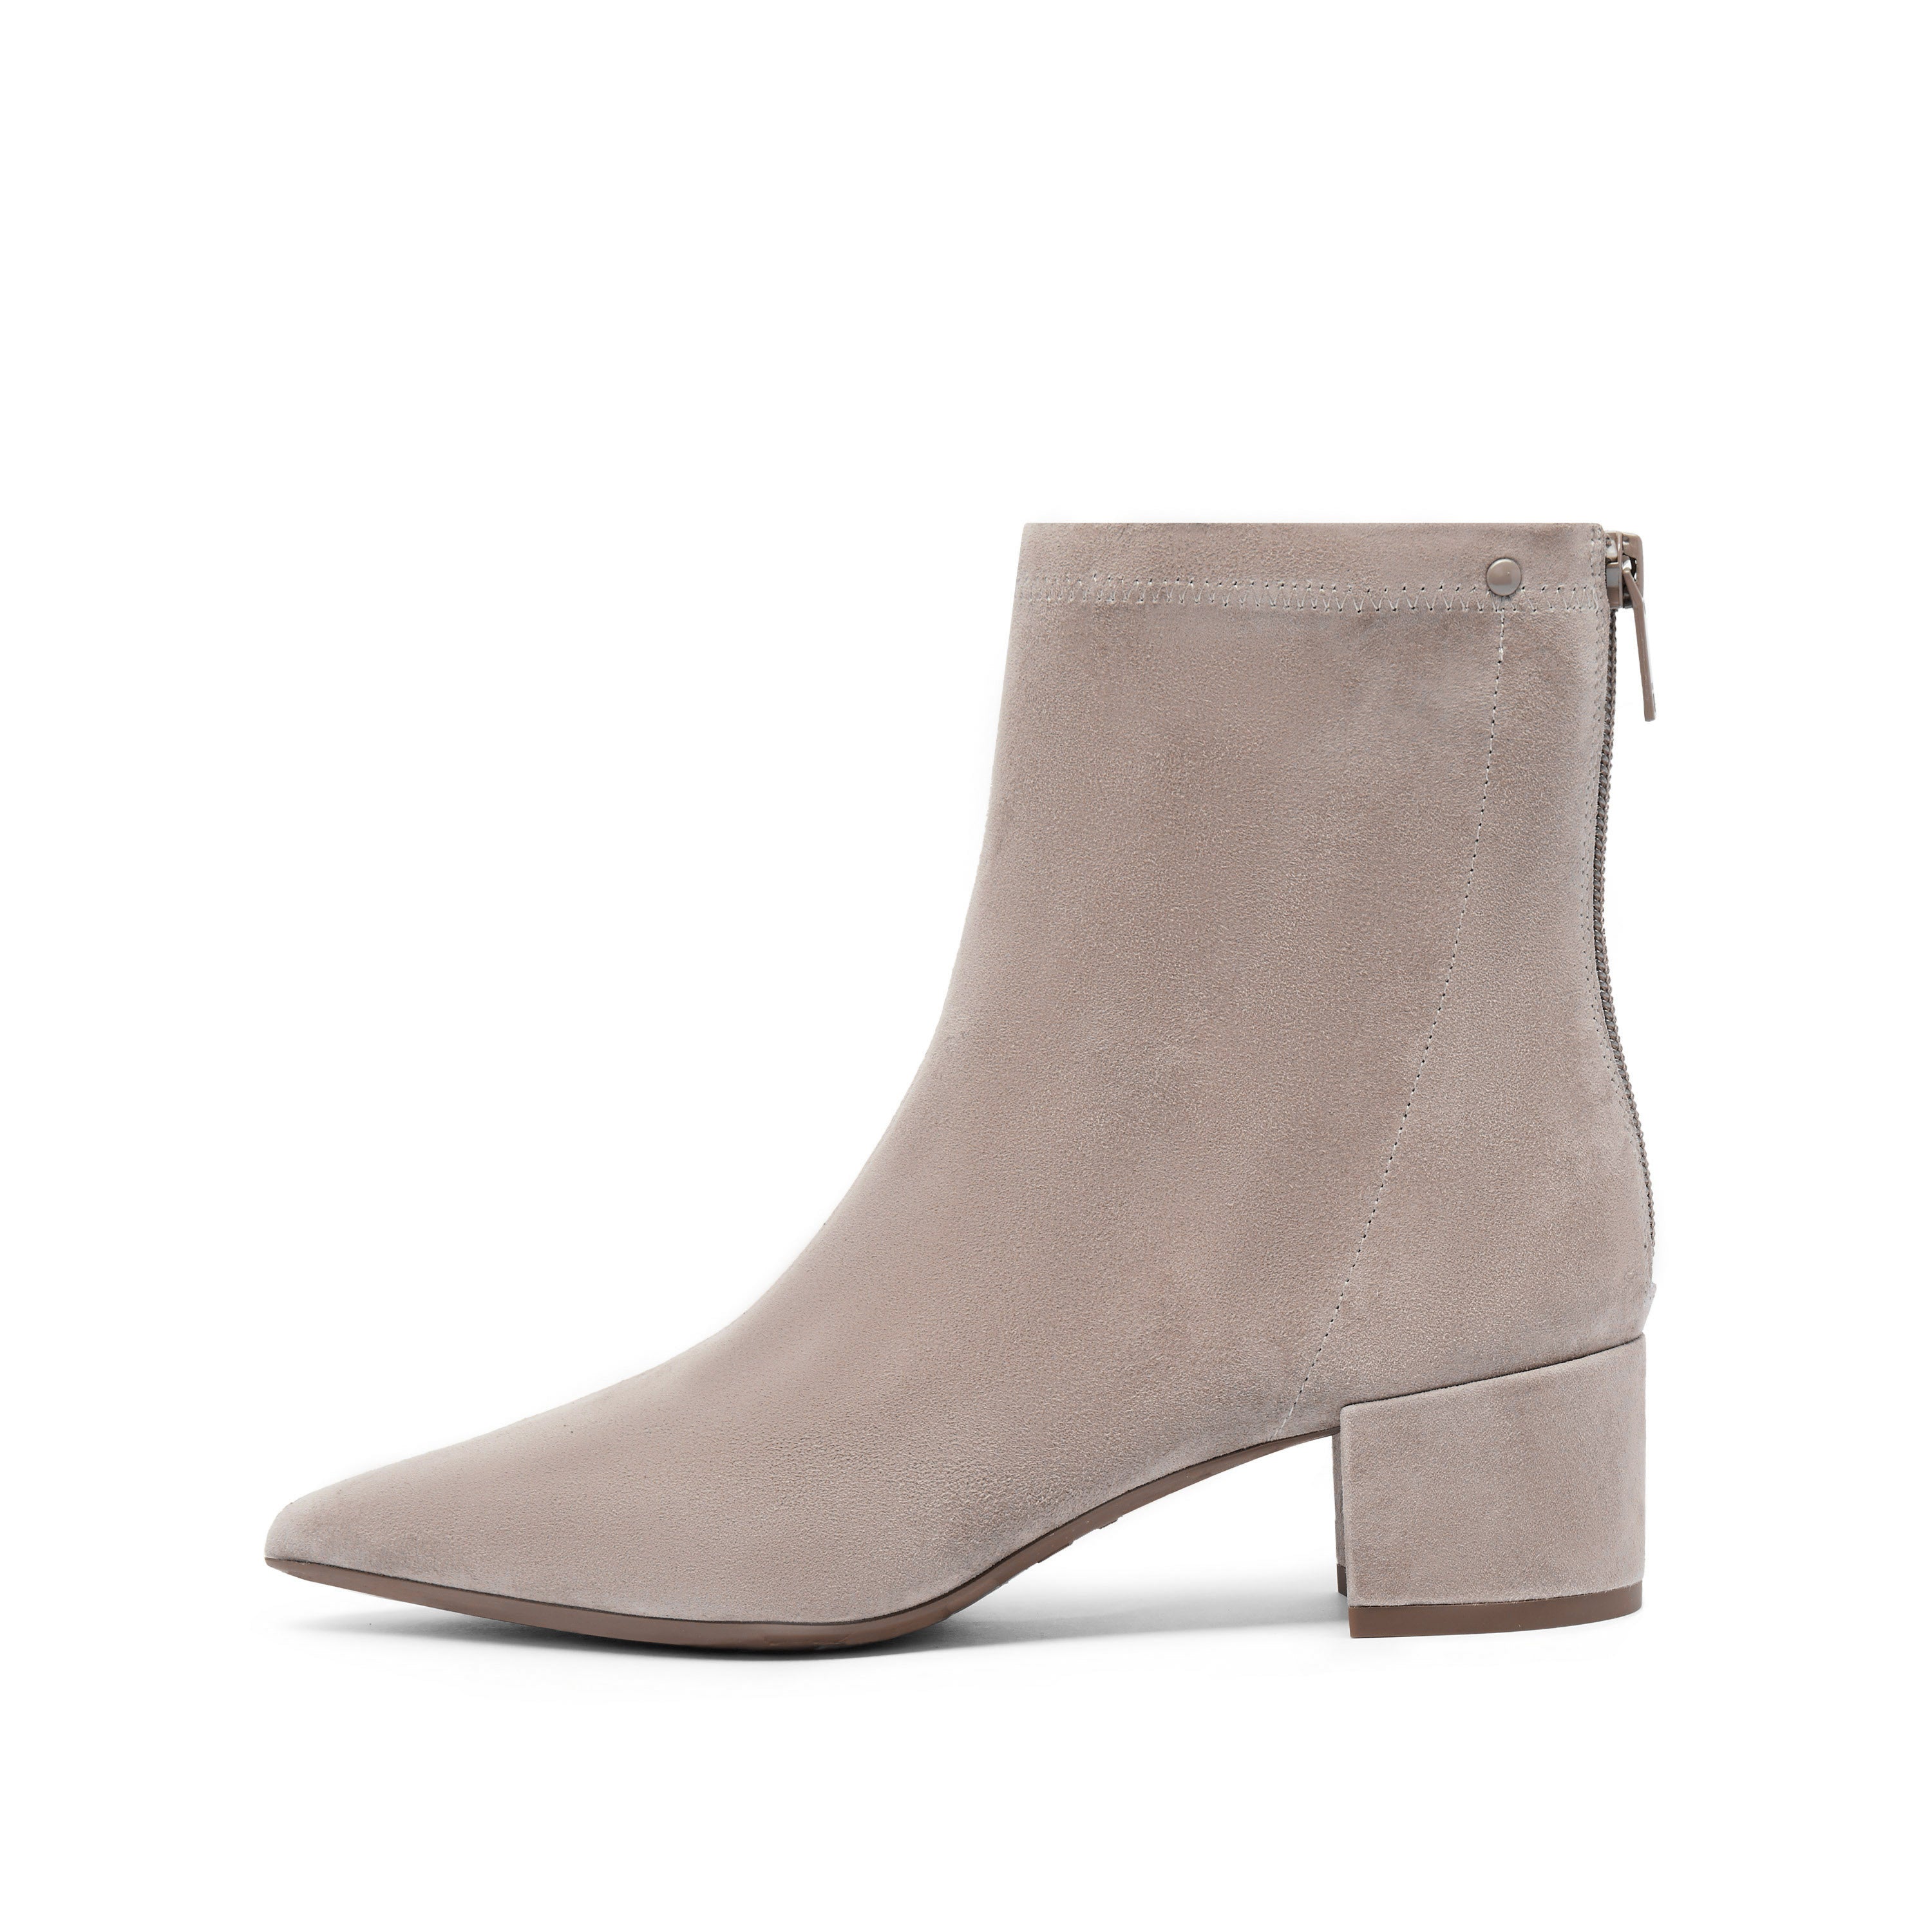 Taupe Suede Pointy Ankle Boots